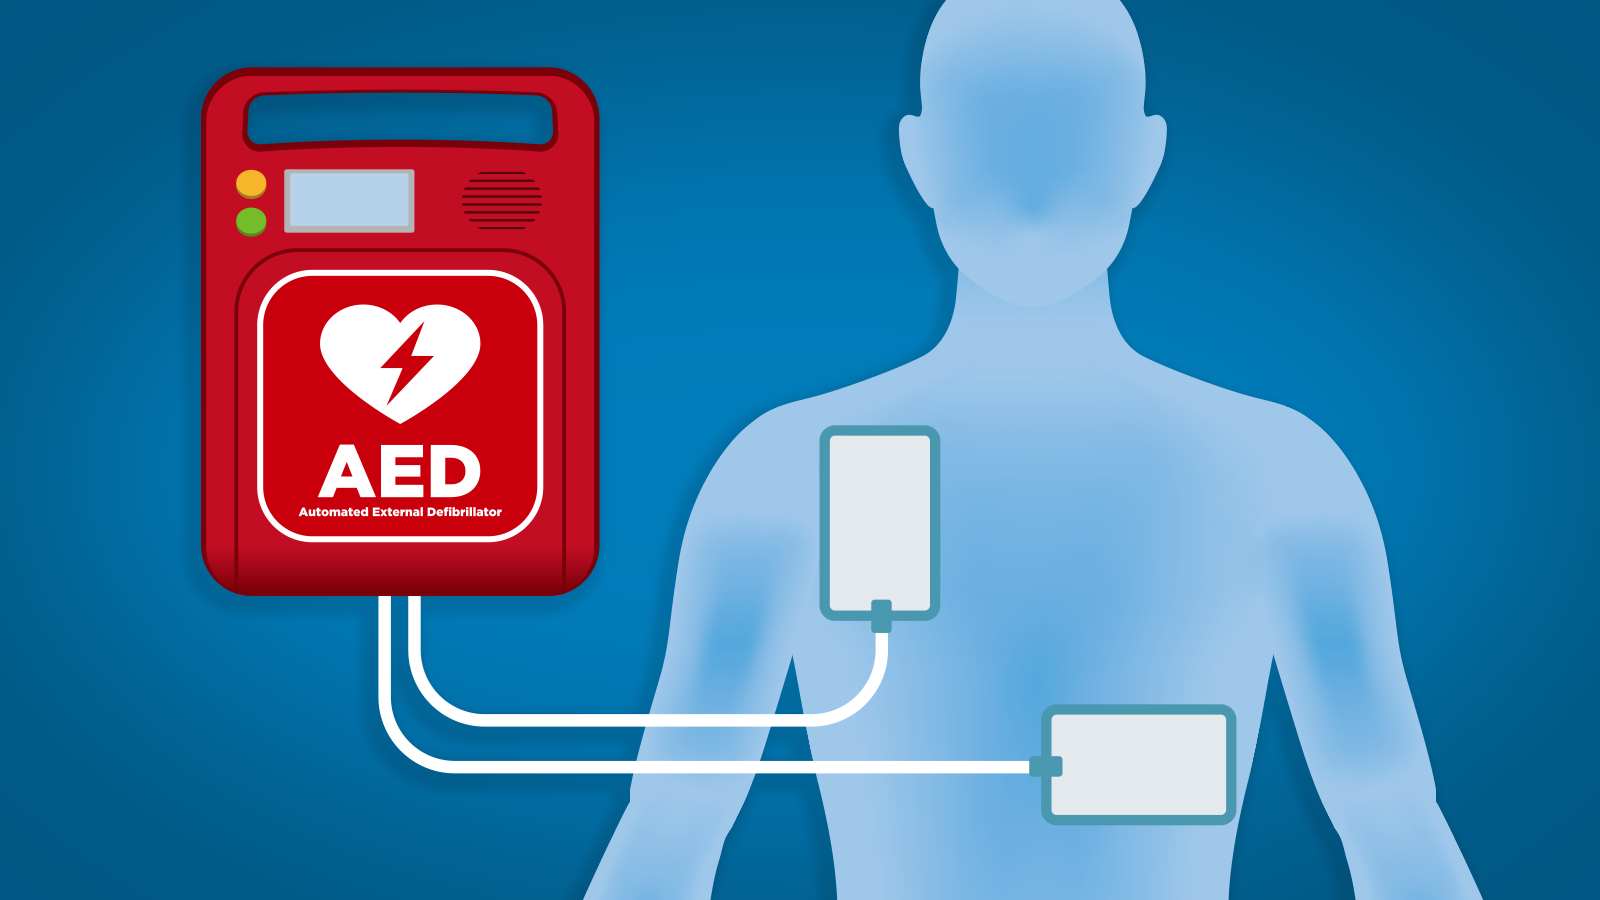 aed meaning